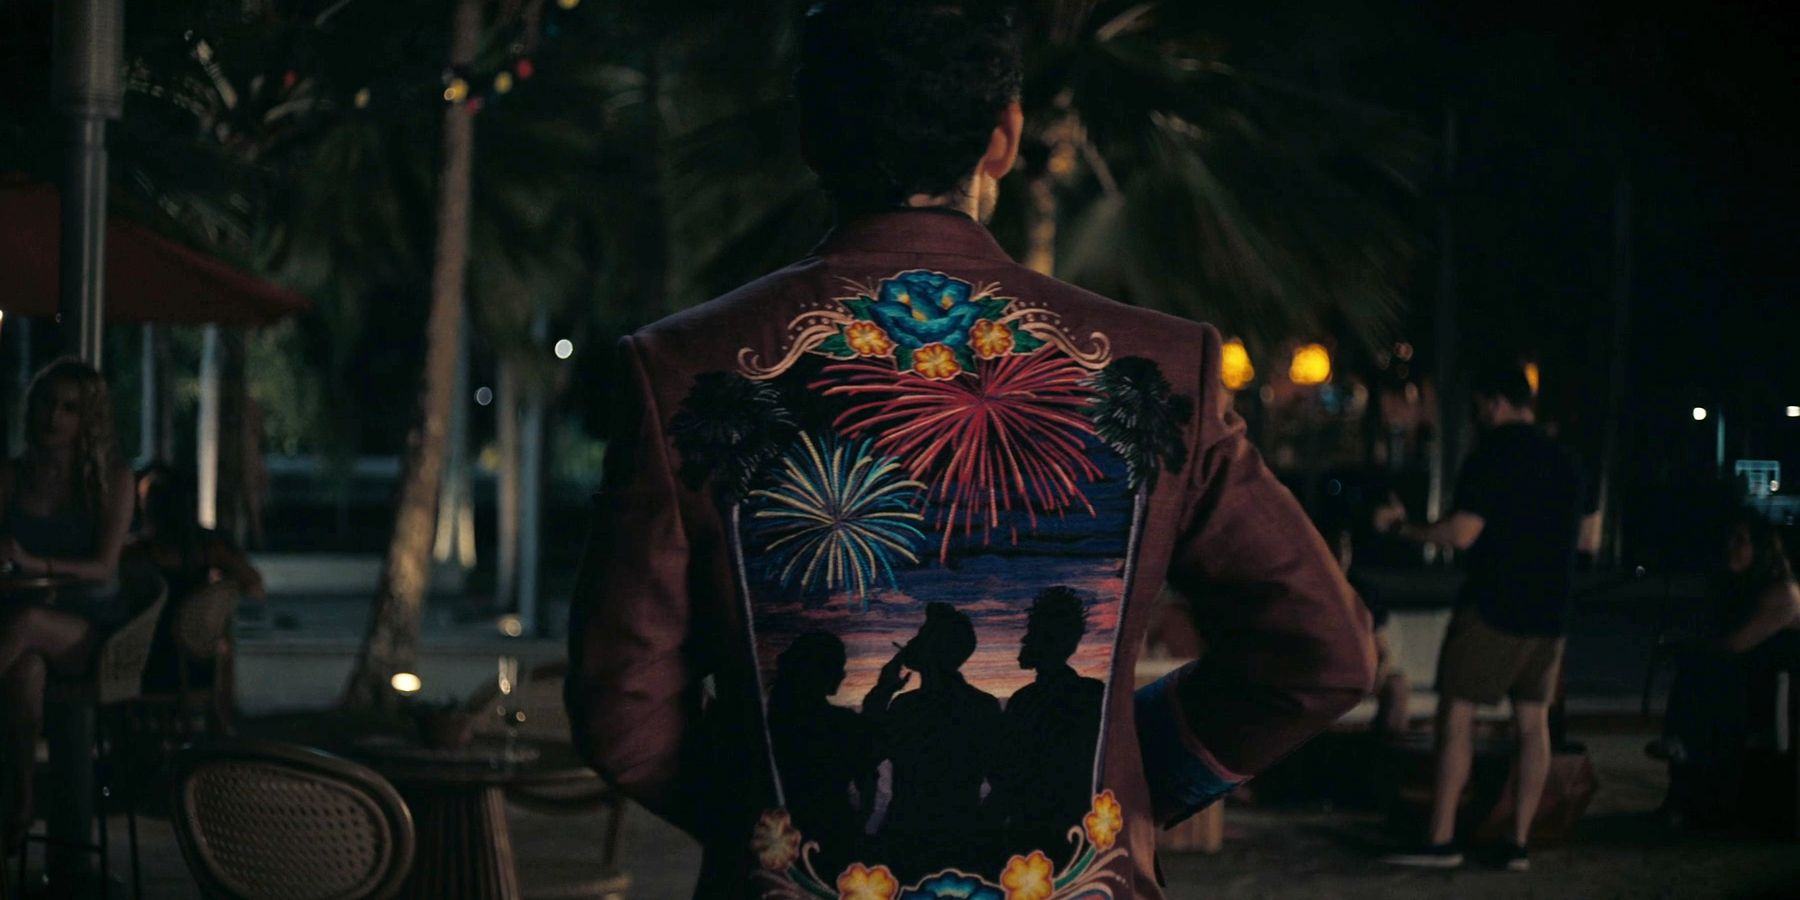 Baltasar Frias' coat depicting Alex, Luna and Baltasar in the end of The Resort